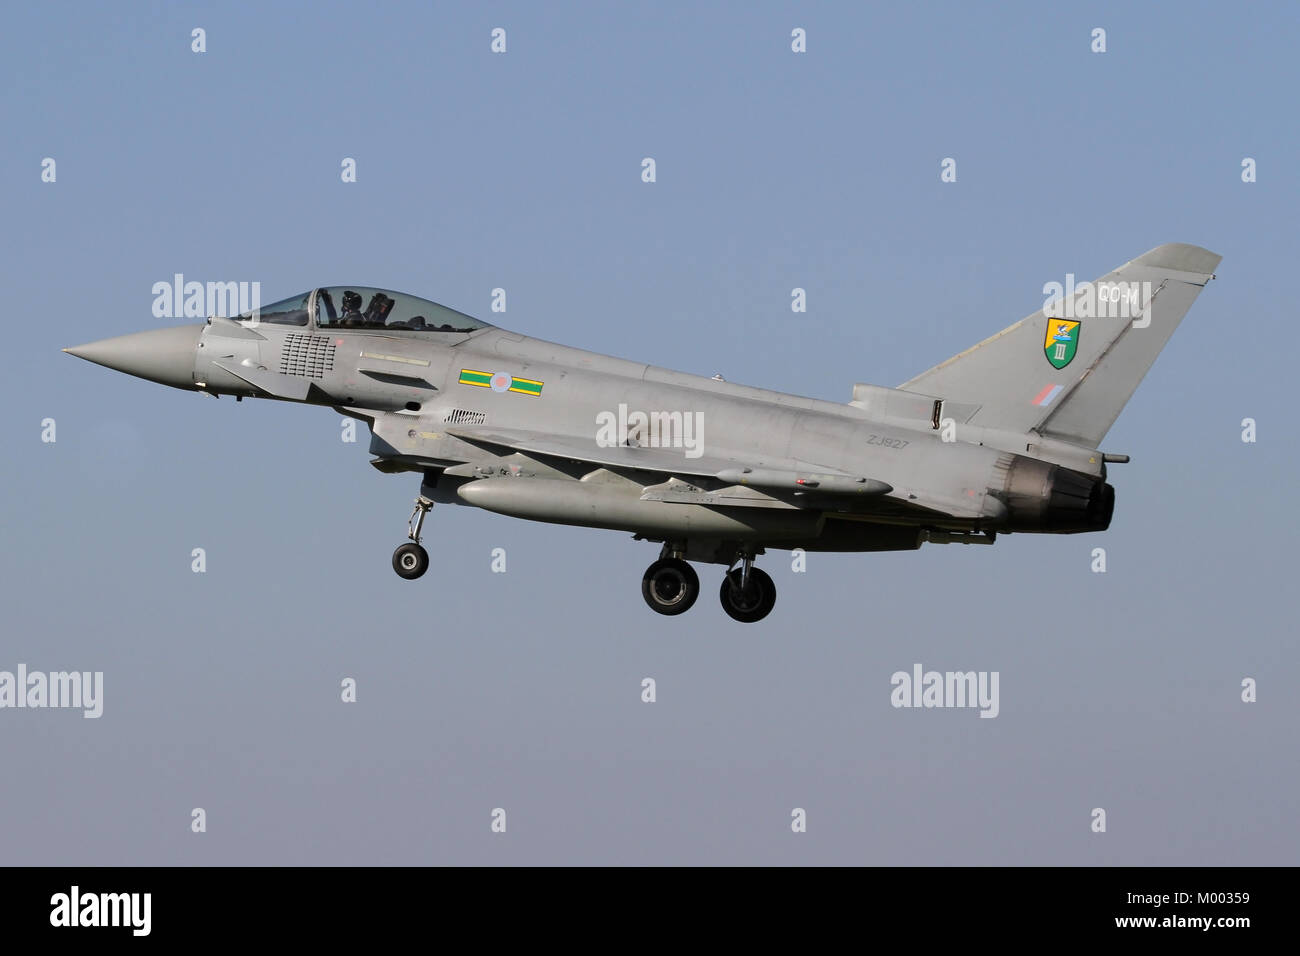 The Royal Air Force Eurofighter Typhoon that flew the most operational missions over Libya in operation Ellamy during 2011, as seen by bomb symbols. Stock Photo